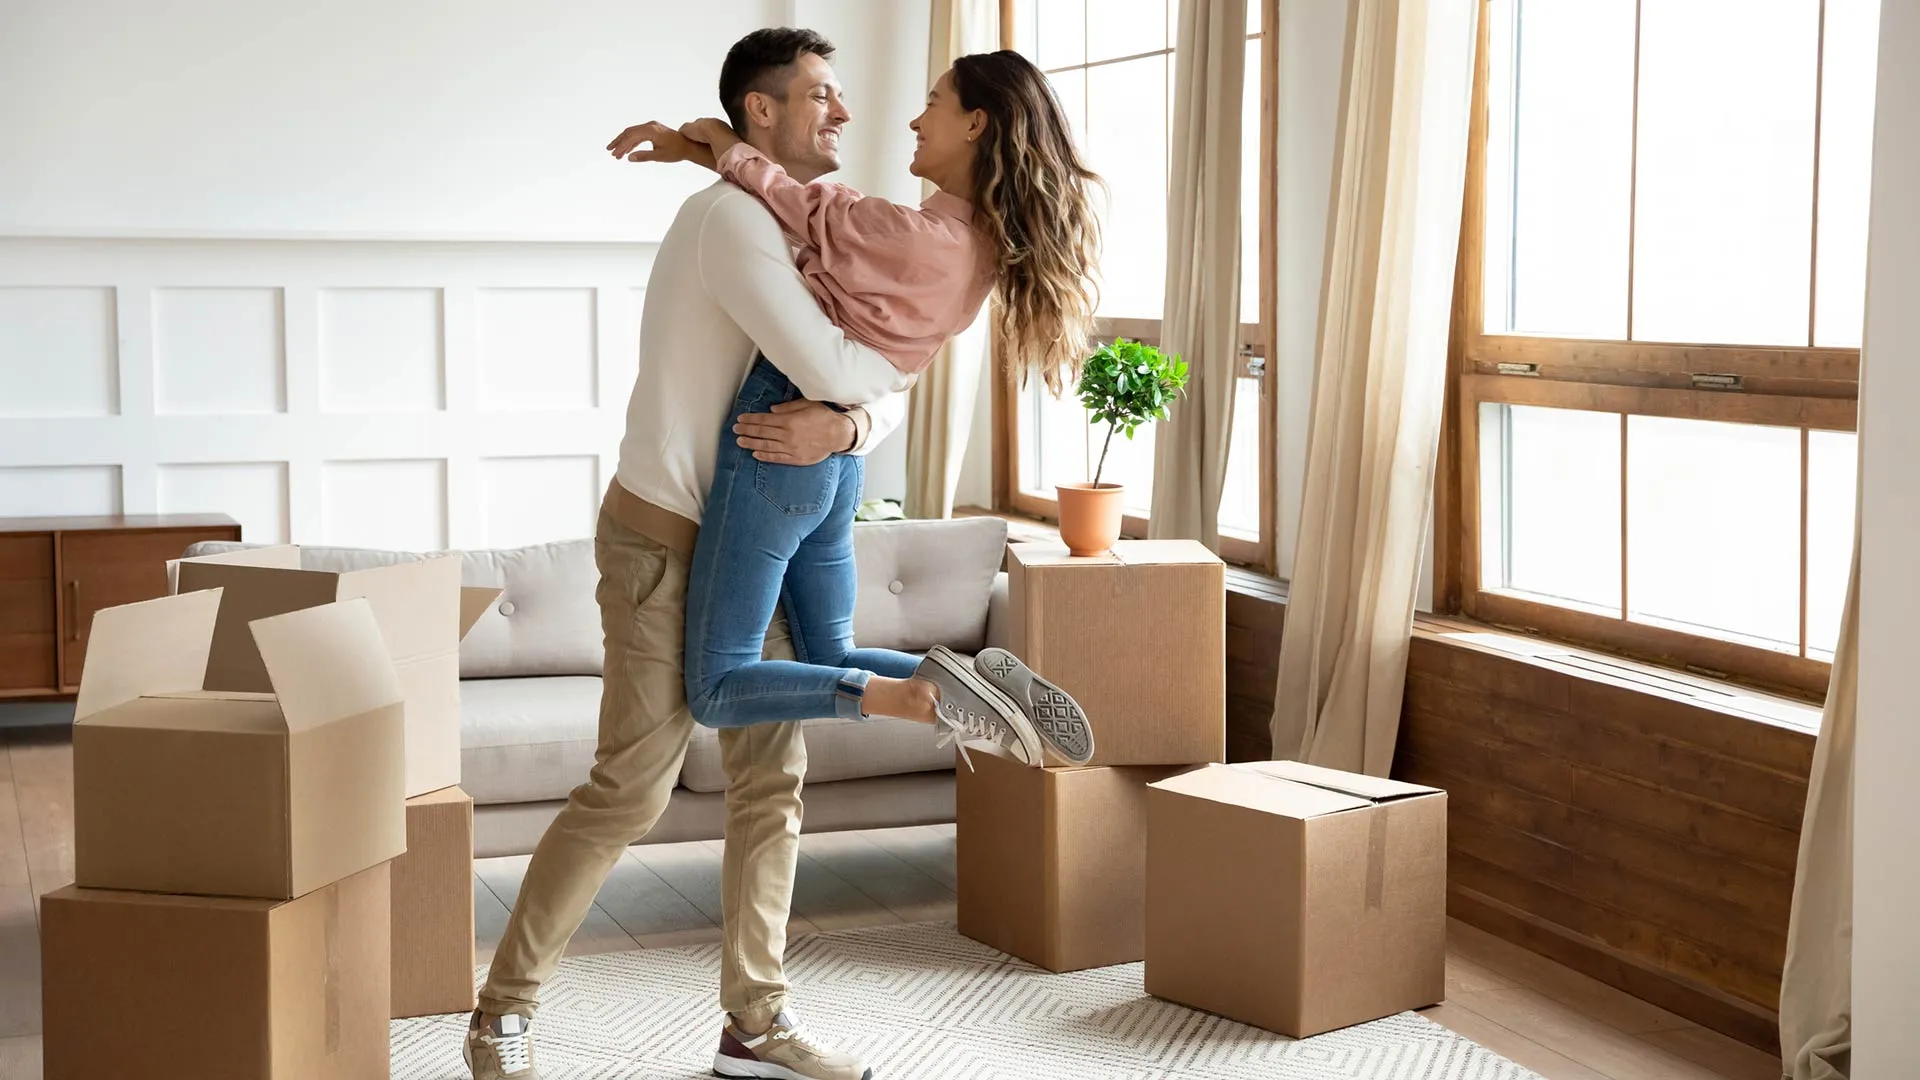 A couple sharing a celebratory embrace while unpacking in their new home.